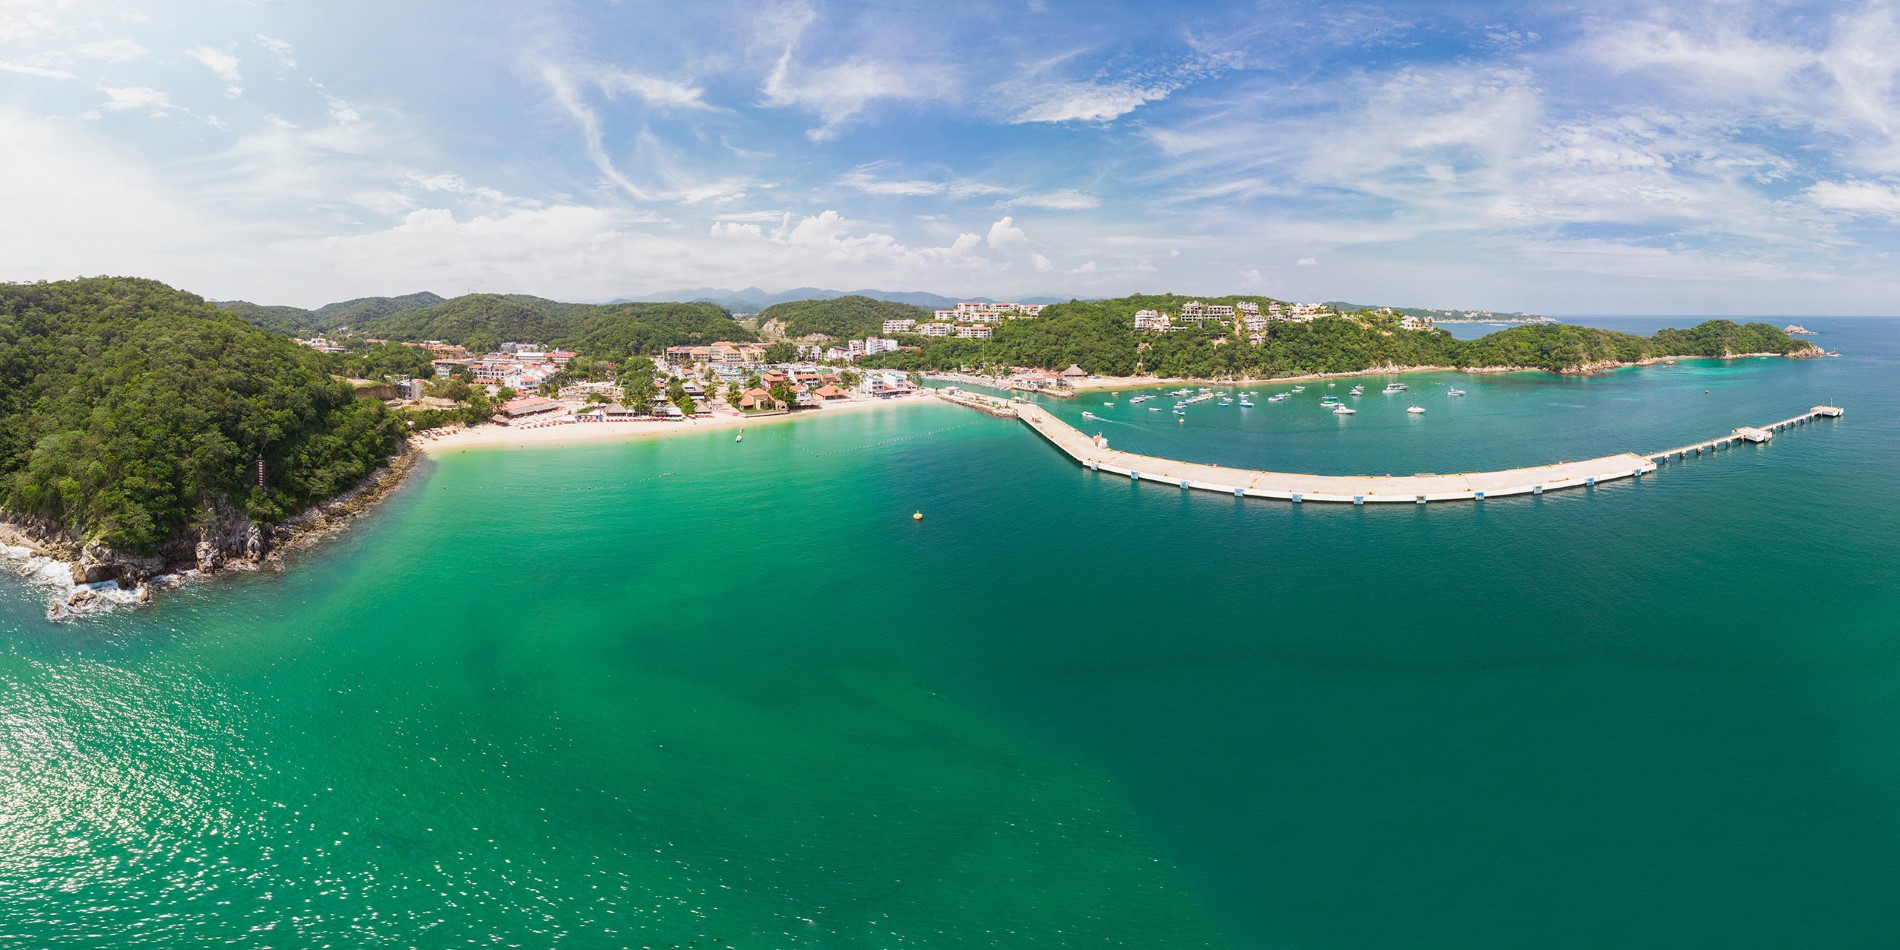 A lot of beautiful beaches in Huatulco, Mexico.